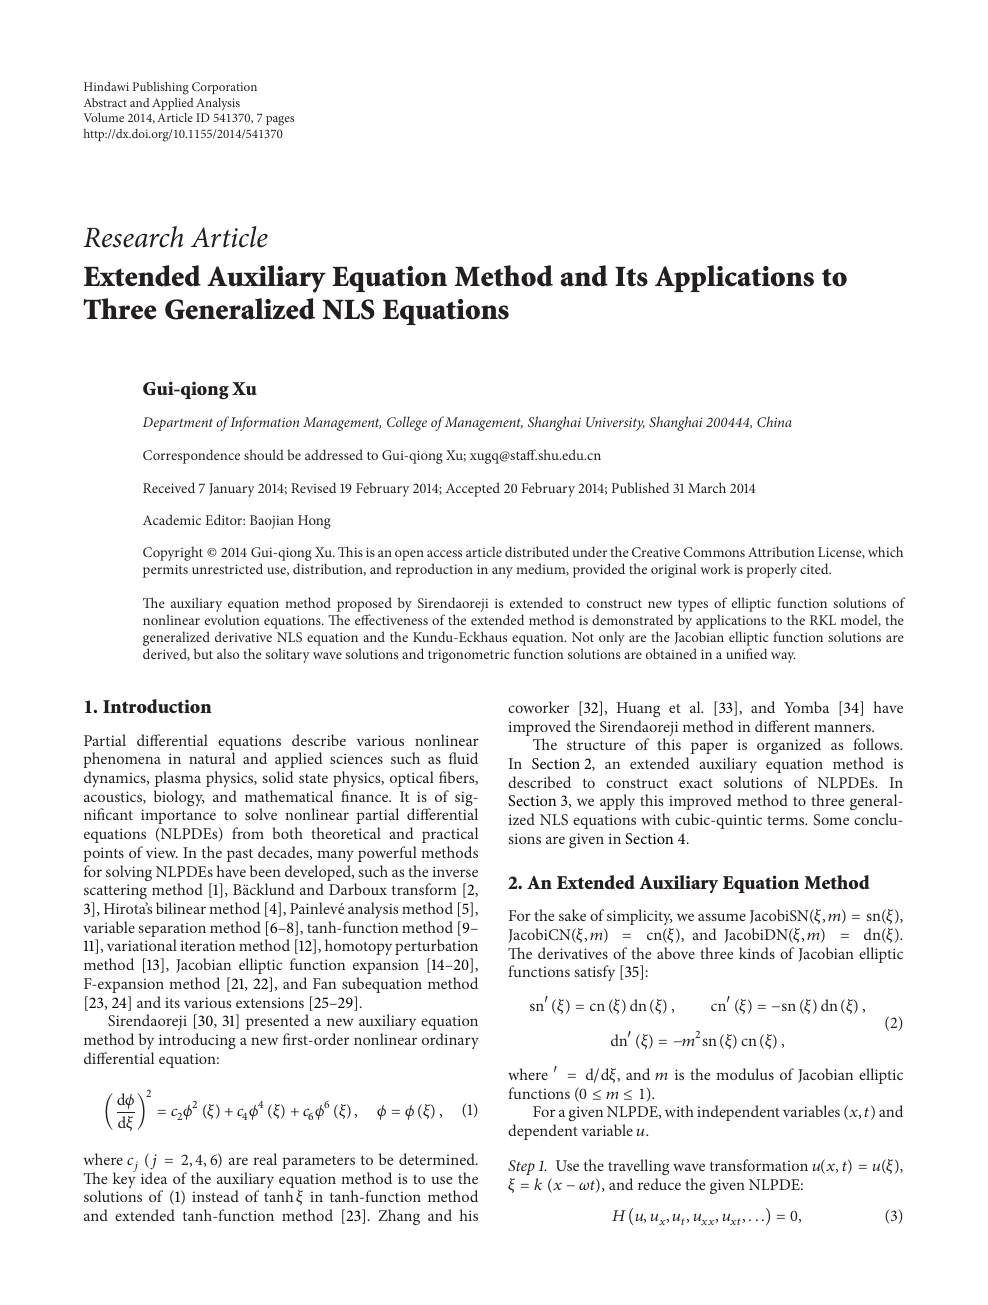 Extended Auxiliary Equation Method And Its Applications To Three Generalized Nls Equations Topic Of Research Paper In Mathematics Download Scholarly Article Pdf And Read For Free On Cyberleninka Open Science Hub